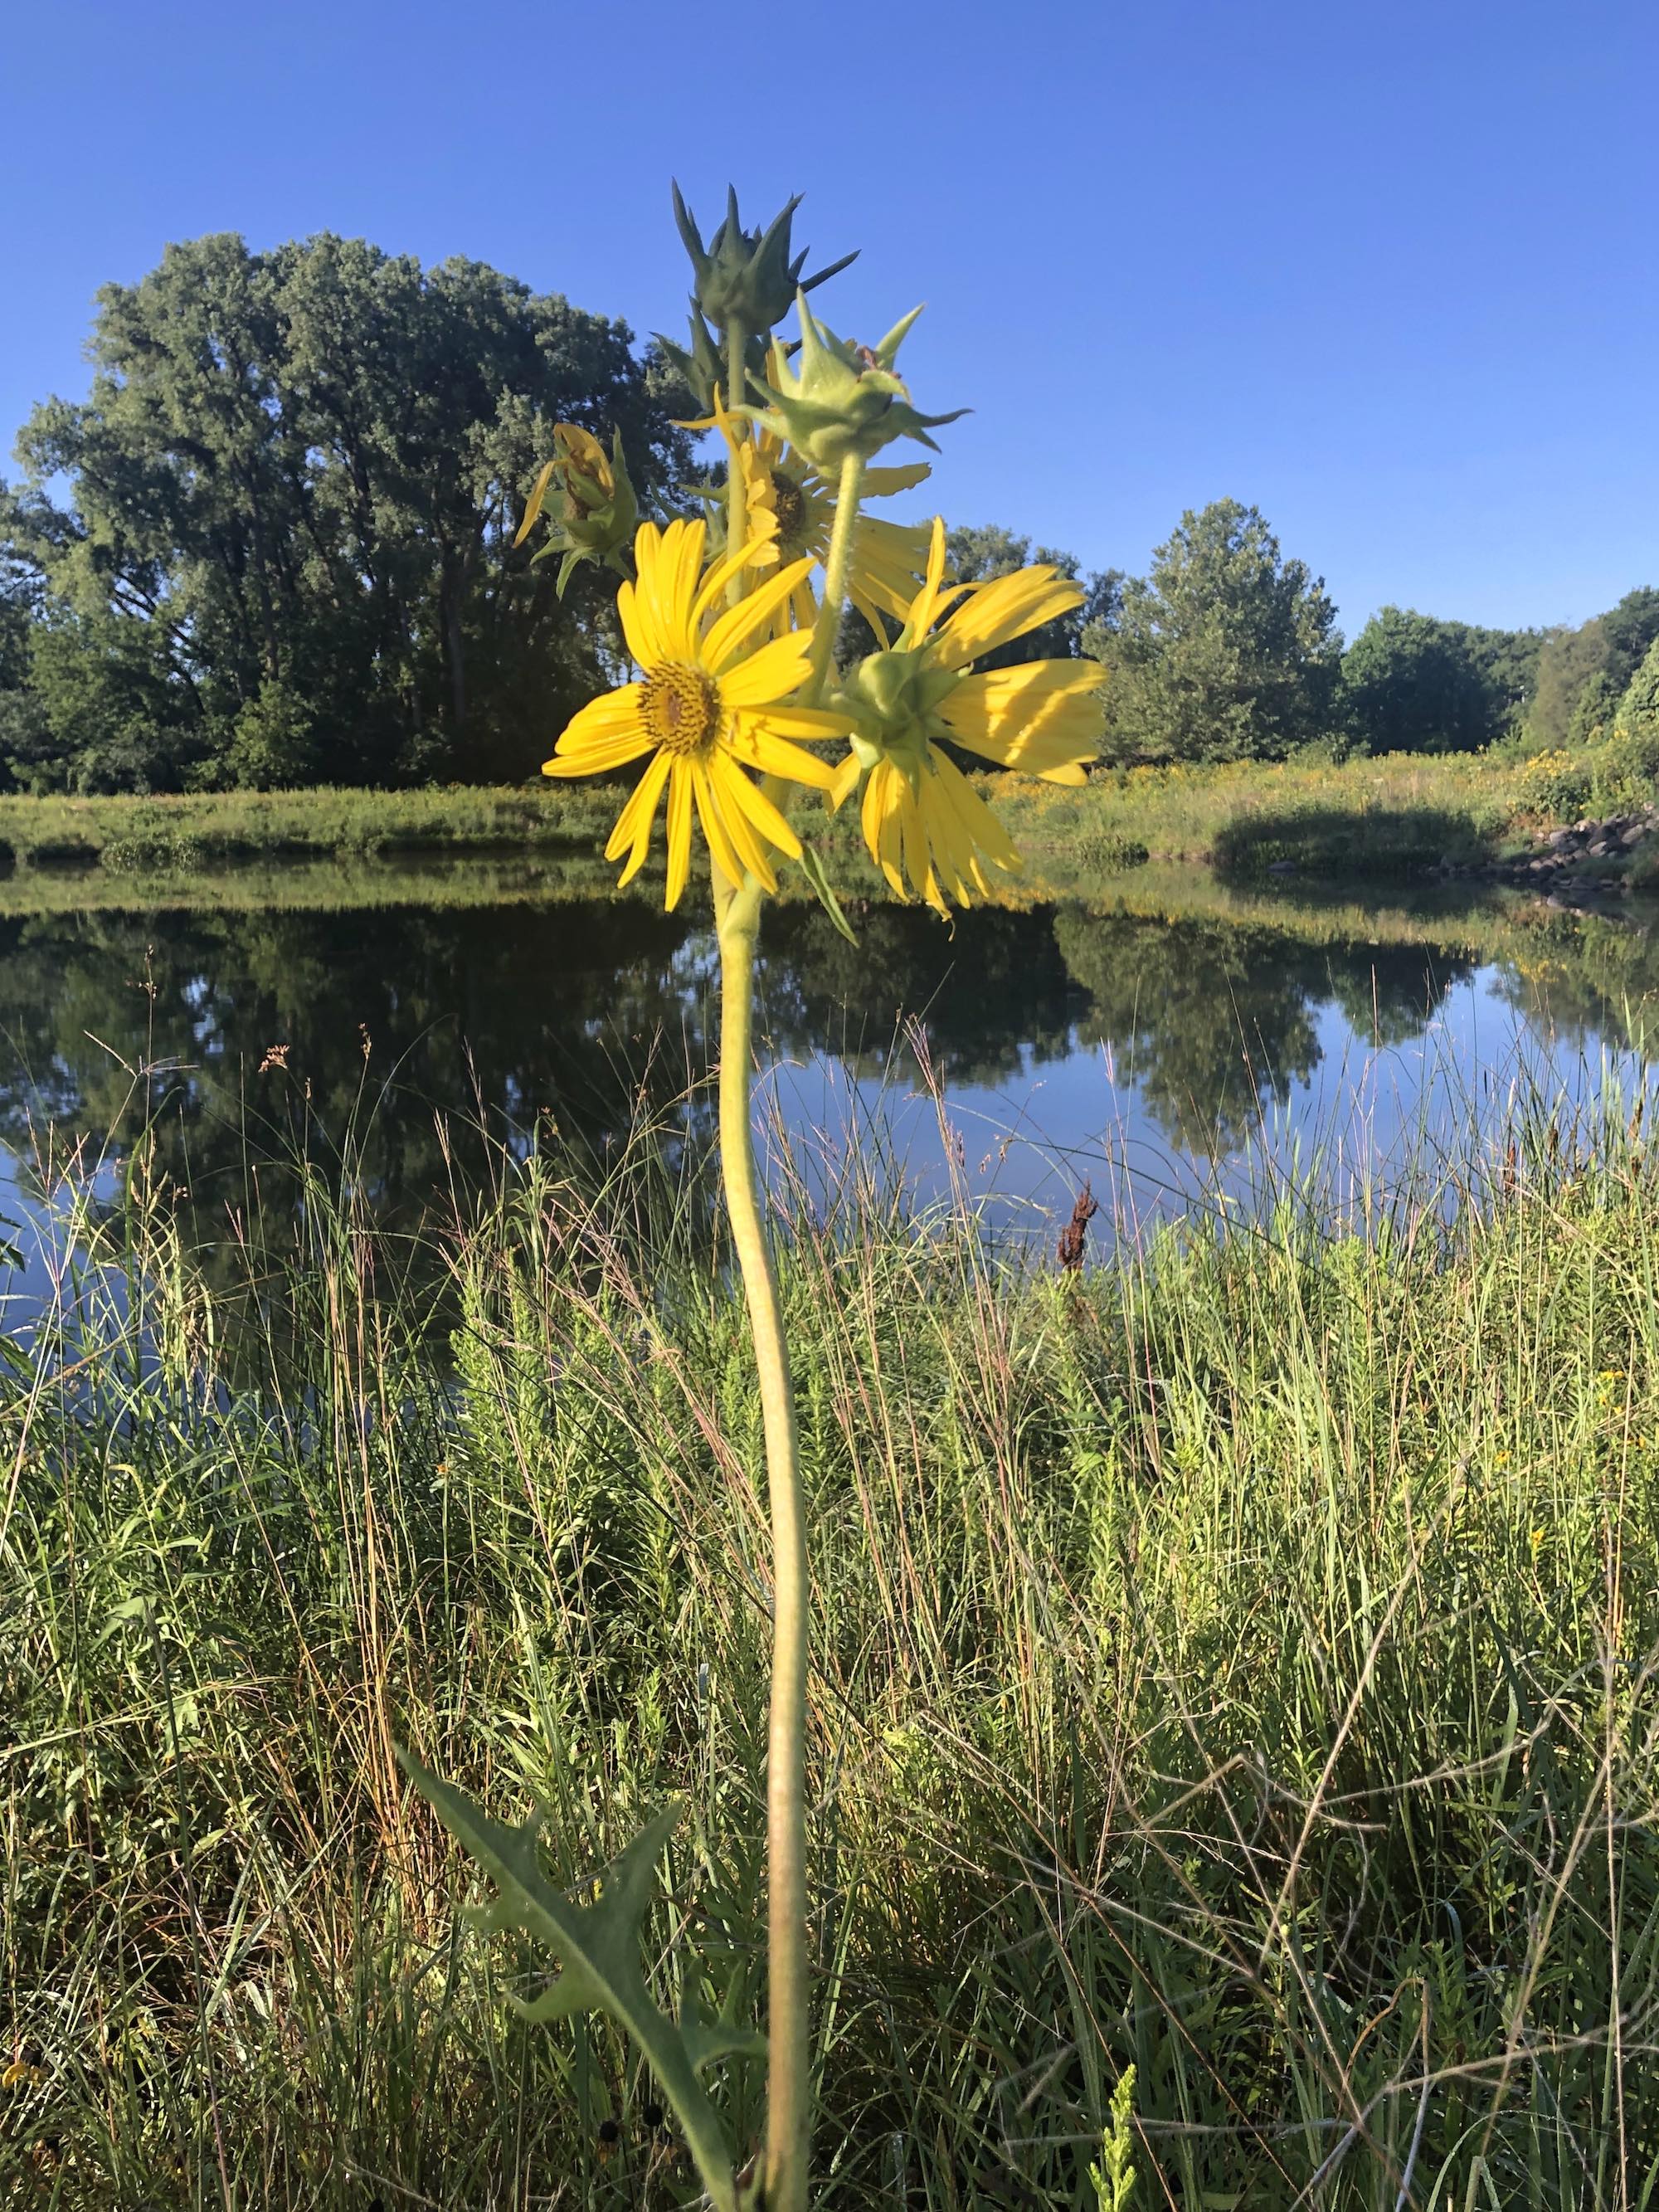 Compass Plant on the shore of the retaining pond on the corner of Nakoma Road and Manitou Way in Madison, Wisconsin on August 11, 2020.